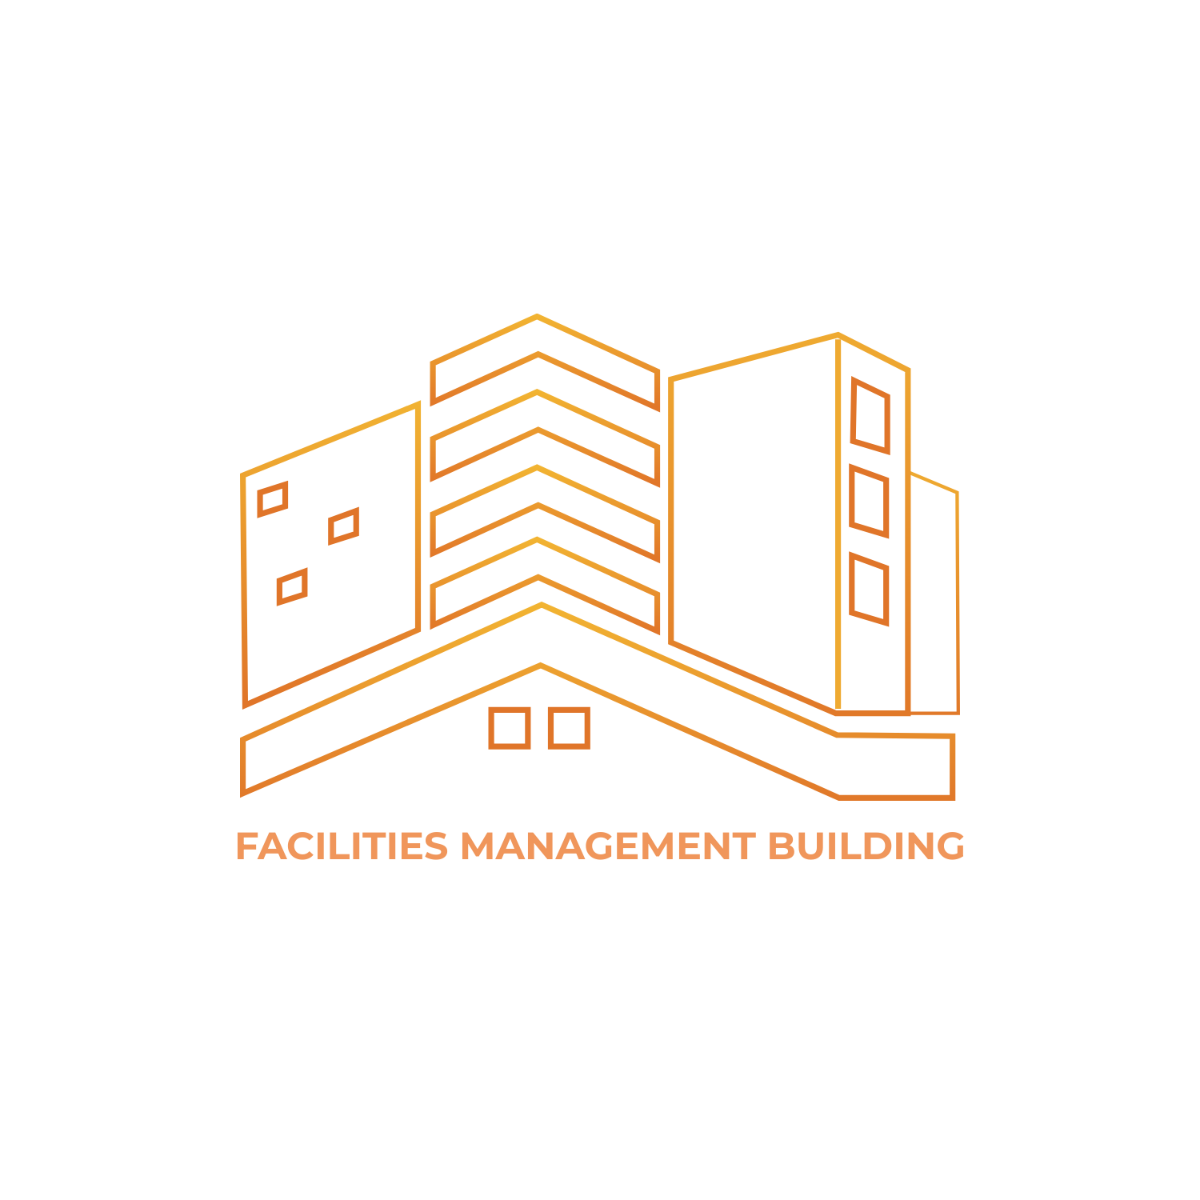 Free Facilities Management Building Logo Template